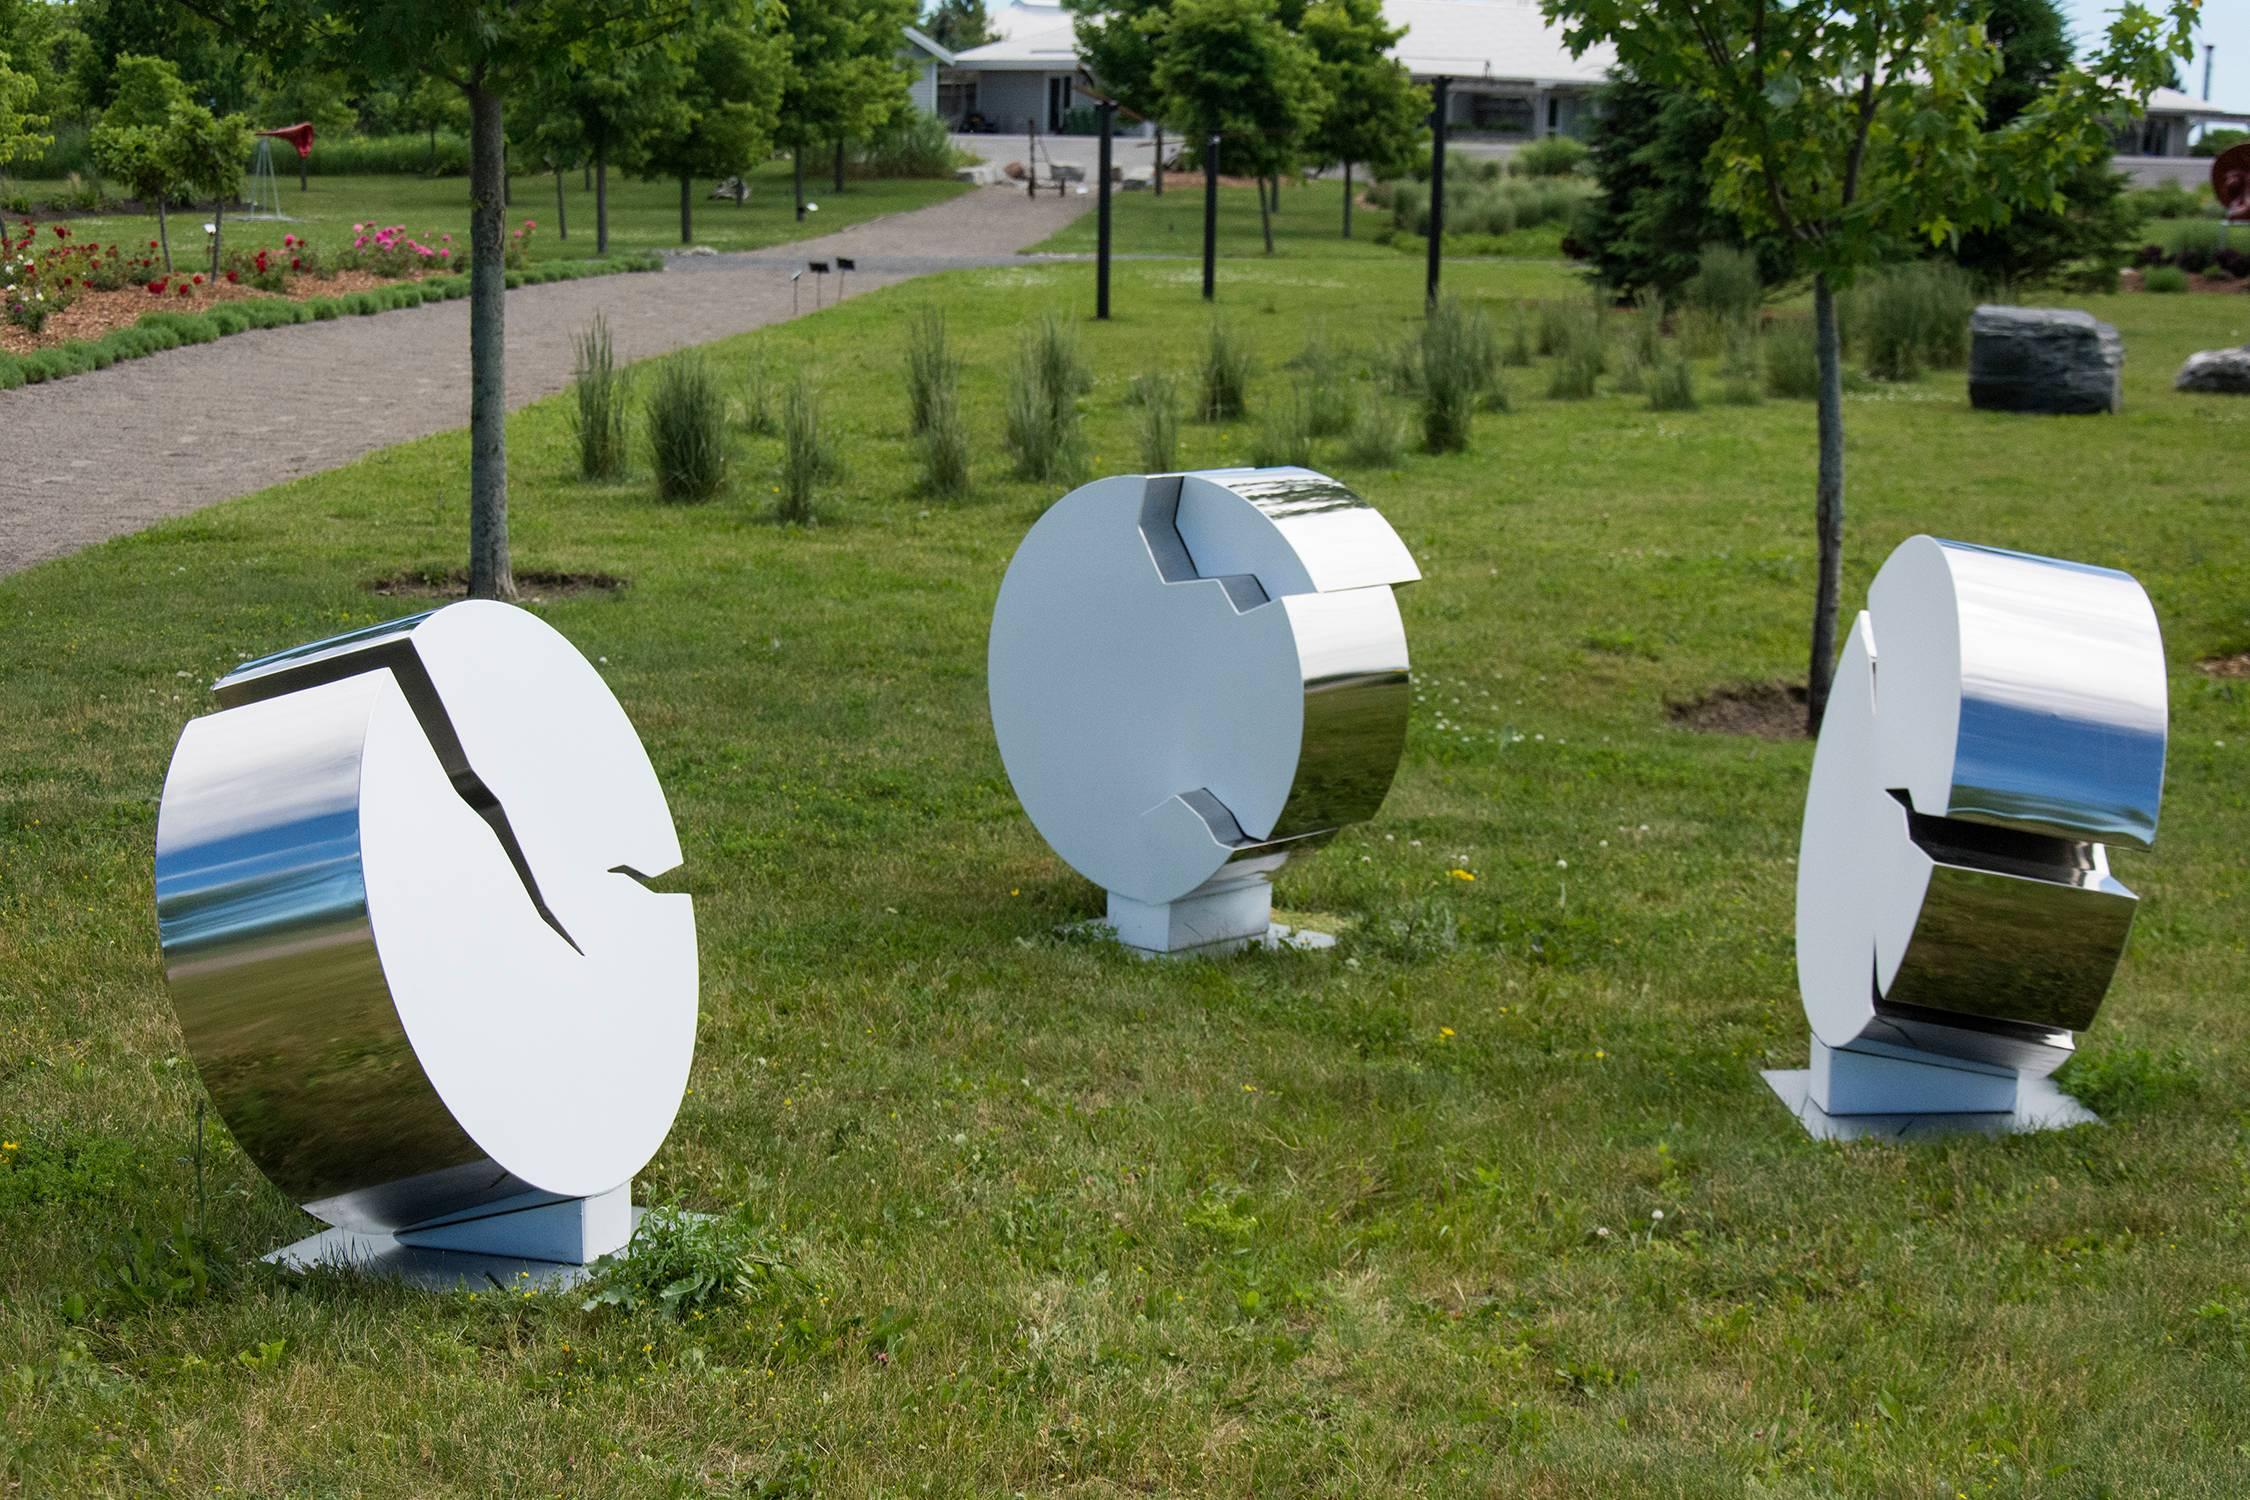 Protecting Ice Memory - white, stainless steel, abstract, outdoor sculpture - Abstract Sculpture by Philippe Pallafray